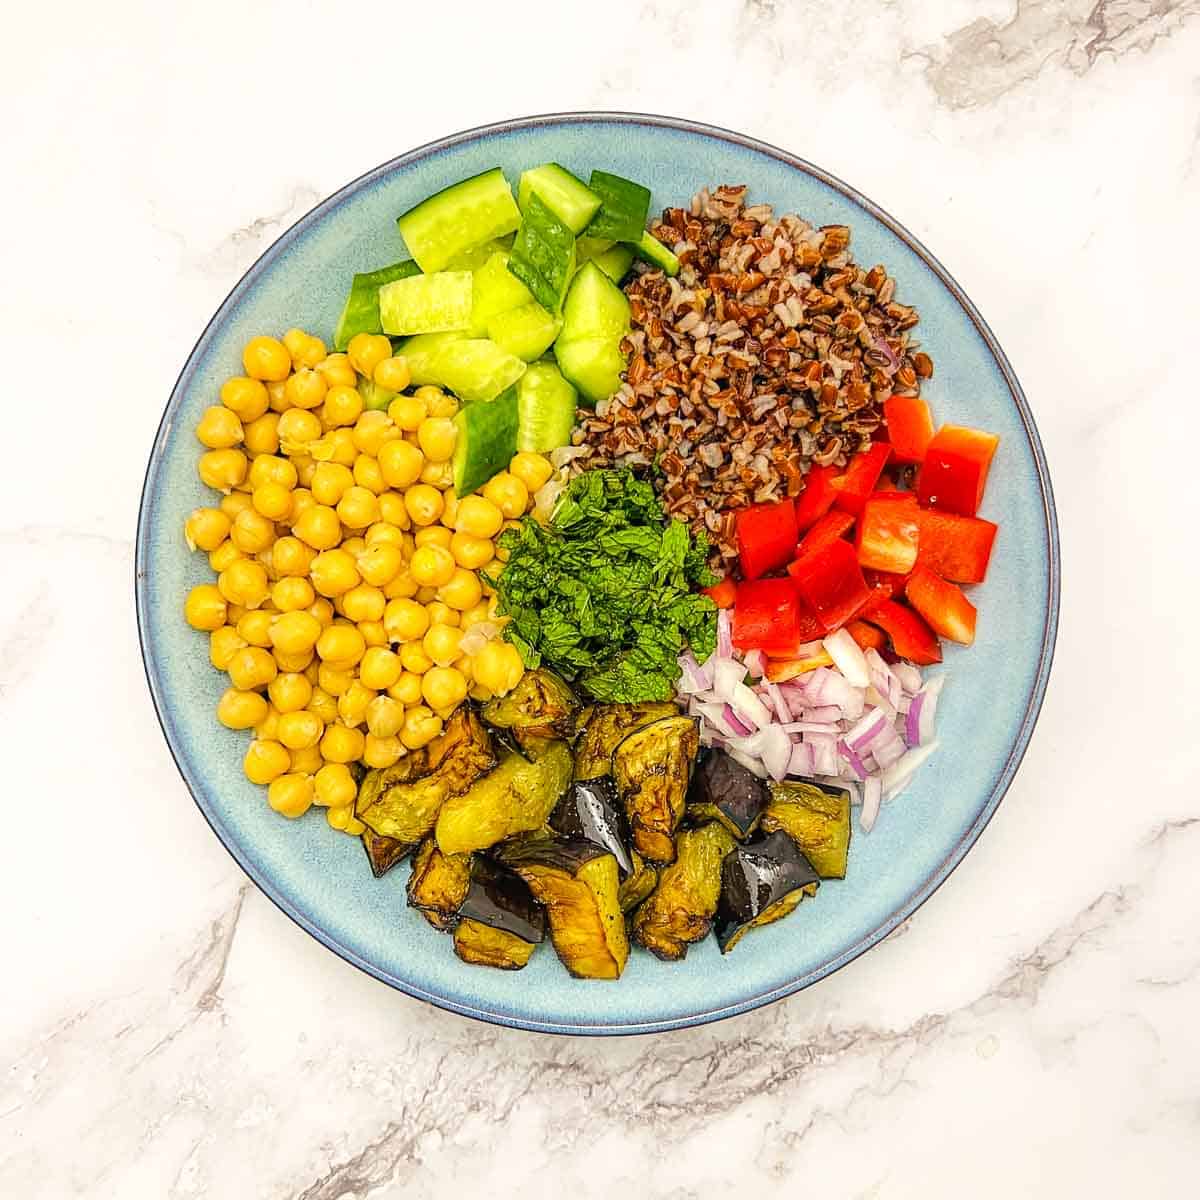 All components of Buddha bowl assembled in a blue bowl.